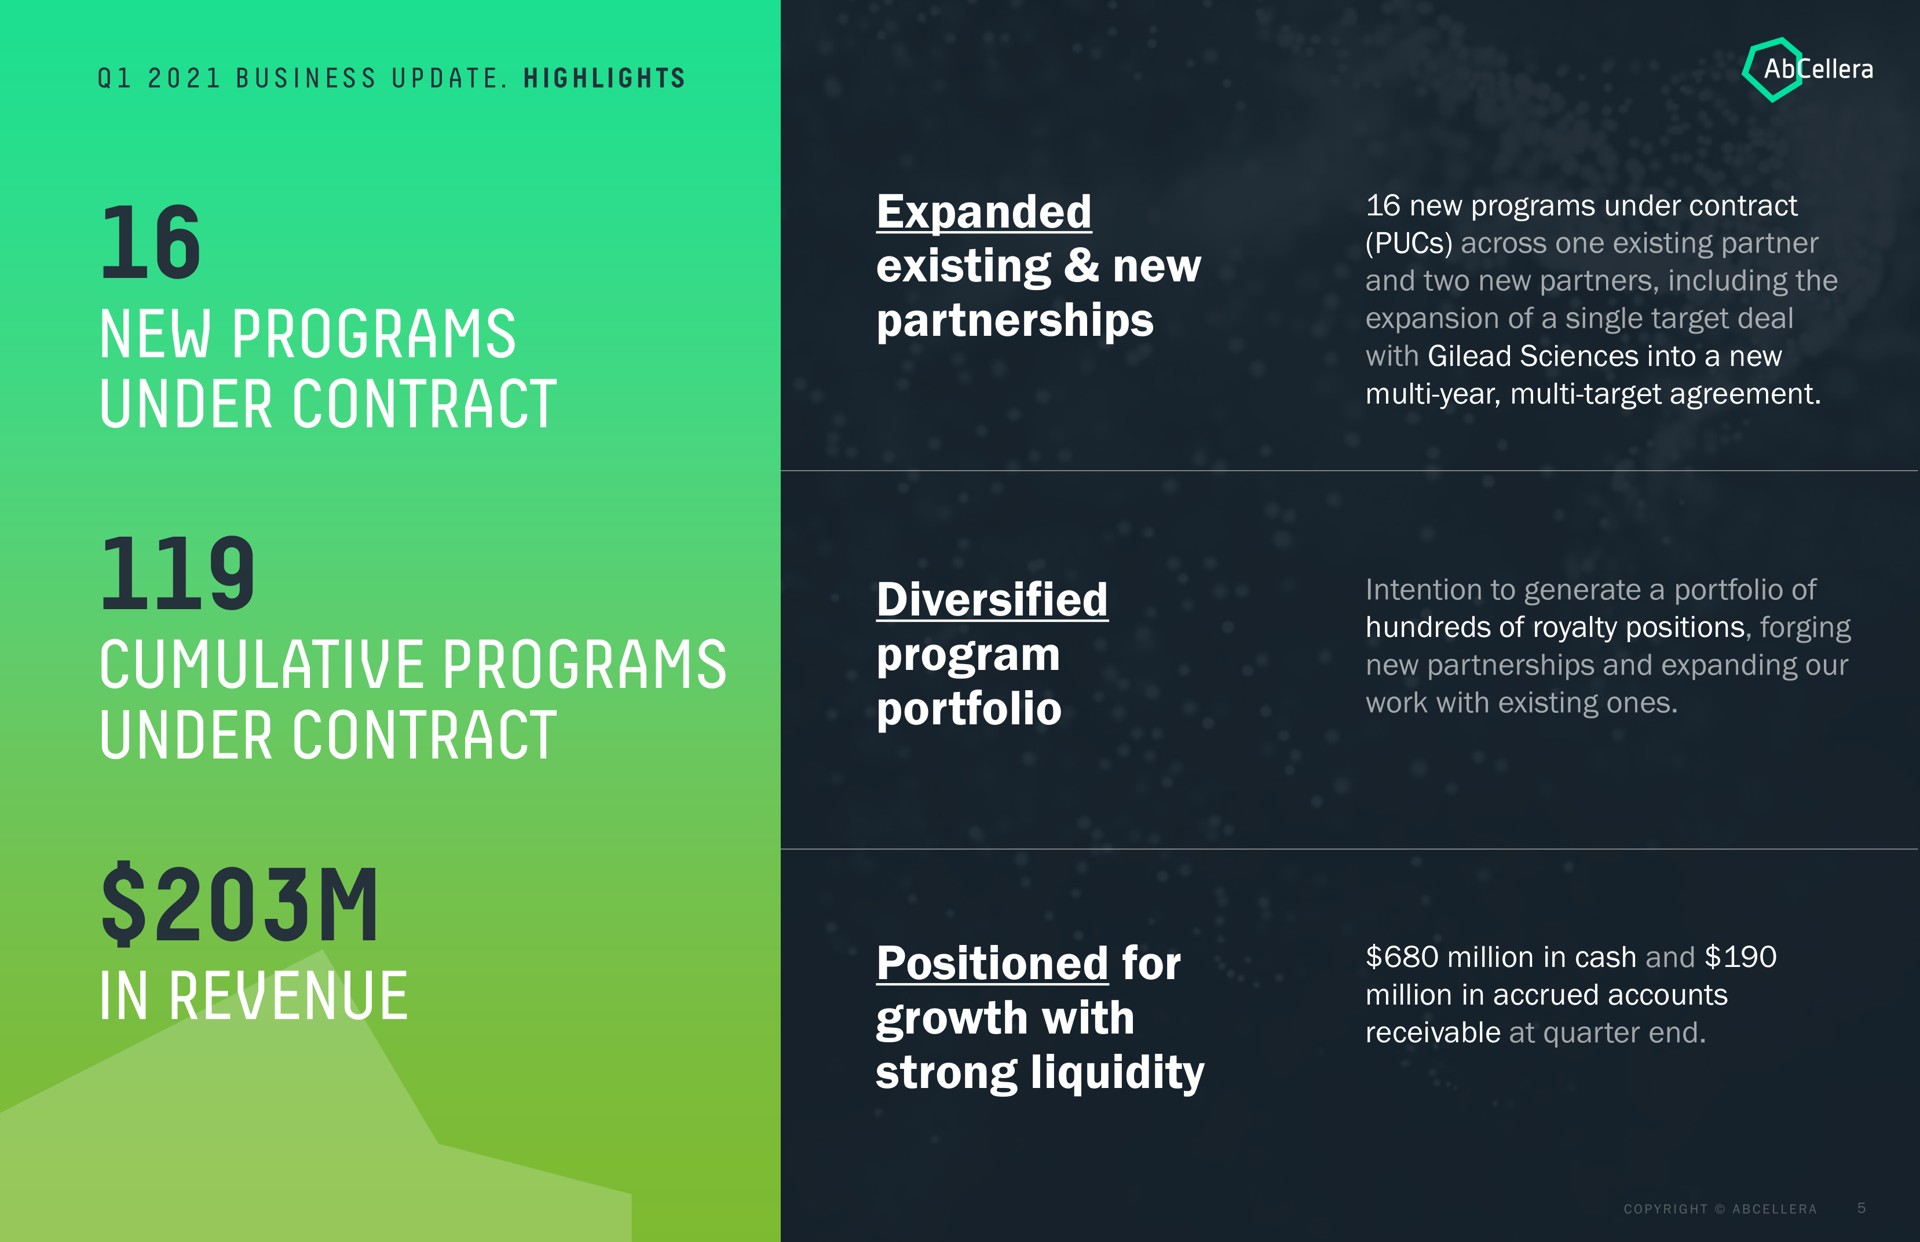 new programs under contract expanded existing new partnerships cumulative programs under contract diversified program portfolio in revenue positioned for growth with strong liquidity | AbCellera